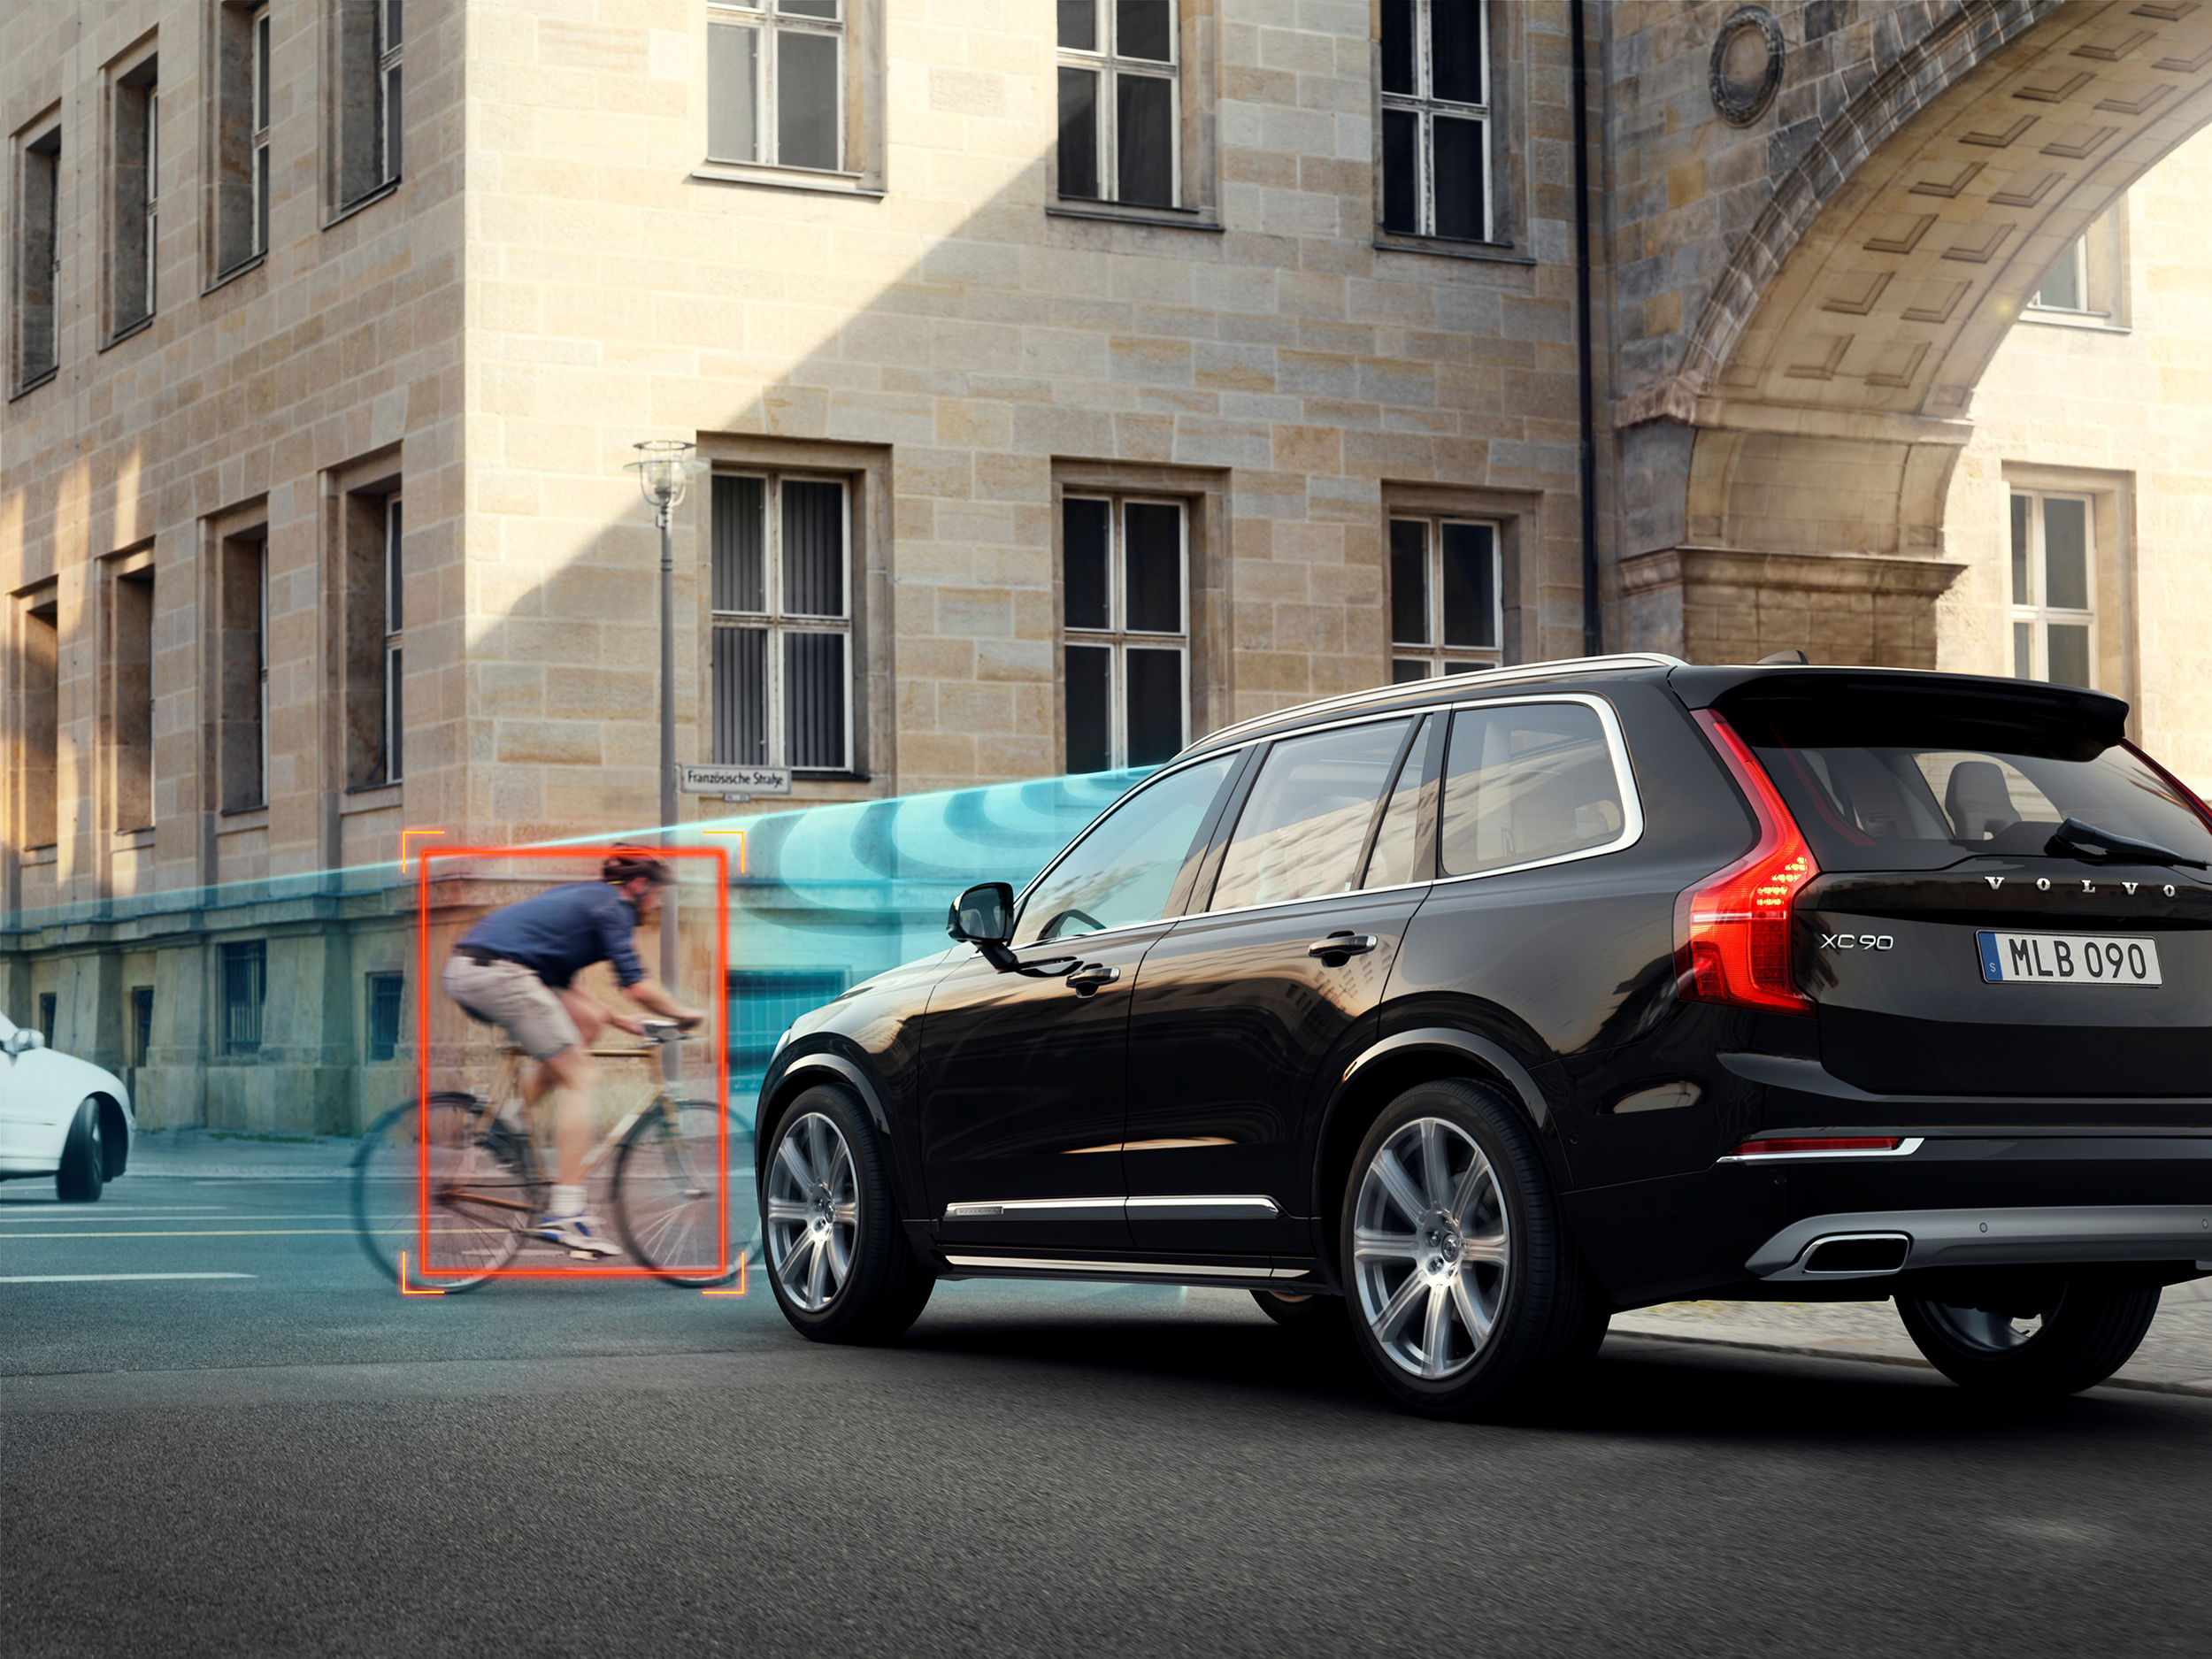 150853_The_all_new_Volvo_XC90_Cyclist_Detection.jpg